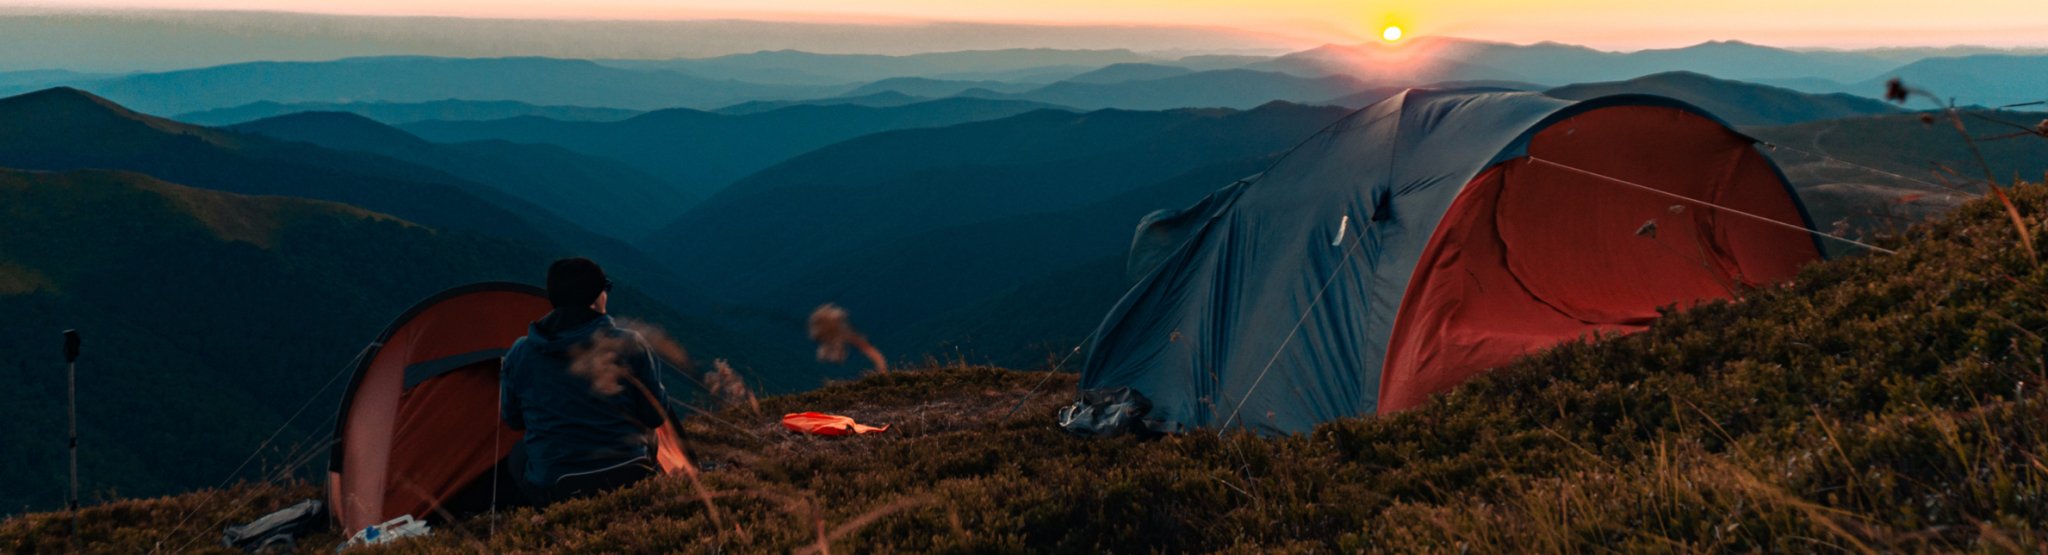 How To Ensure Bugs Don’t Ruin Your Autumn Camping Experience - aZengear